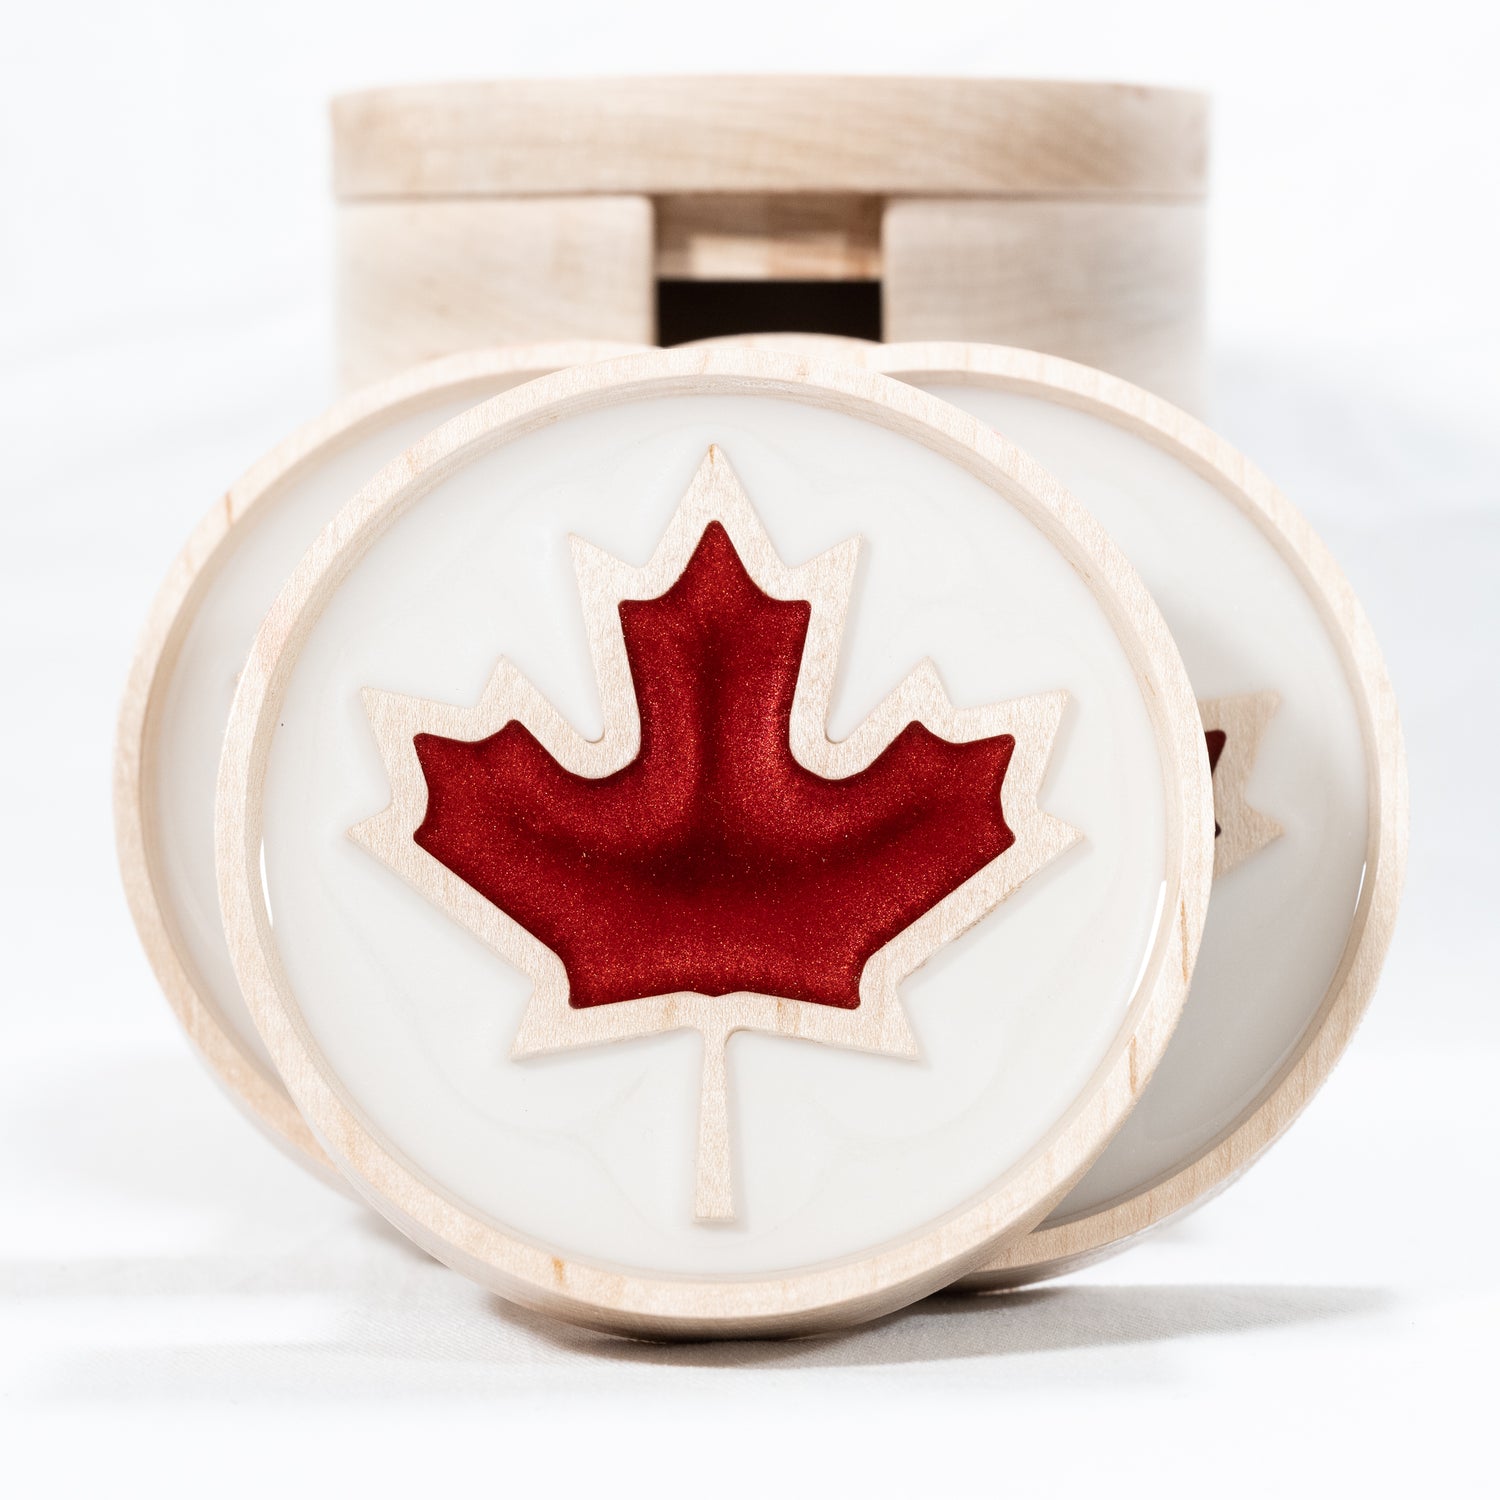 Maple coaster set with red resin maple leaf on white background